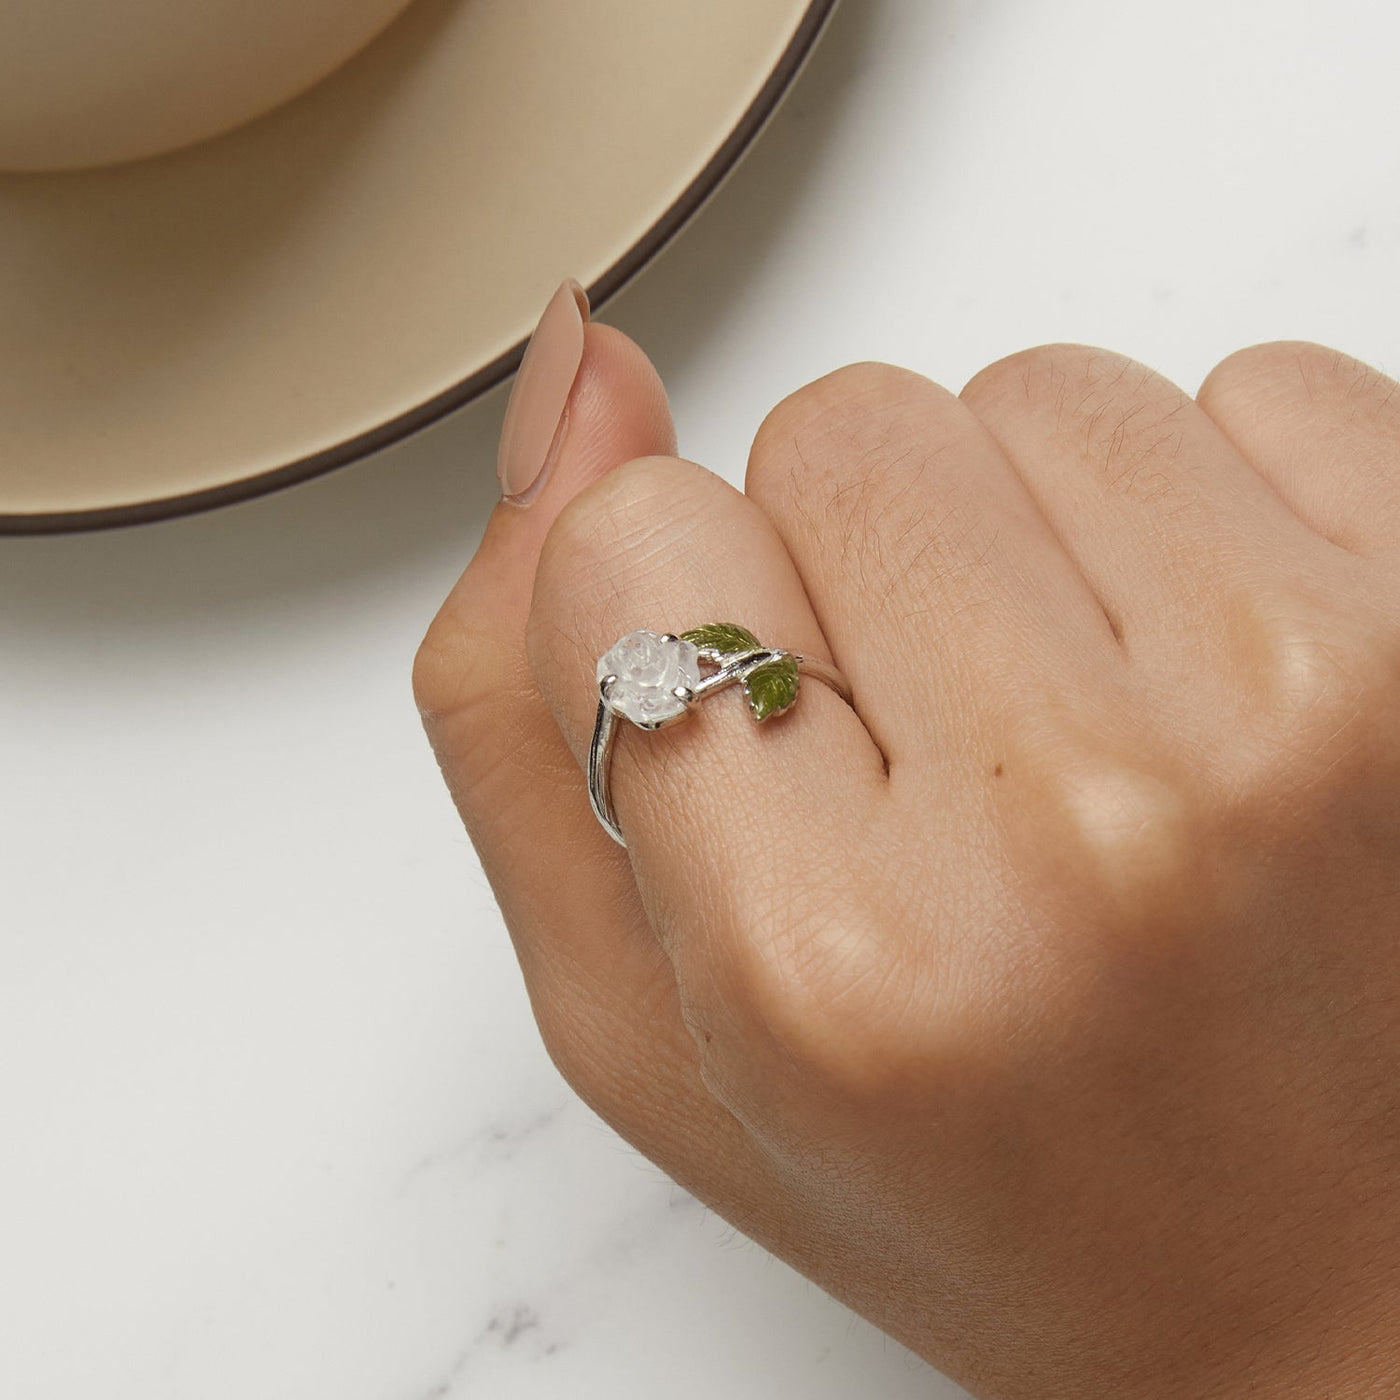 Colour Changing Rose Open Ring - The Silver Goose SA